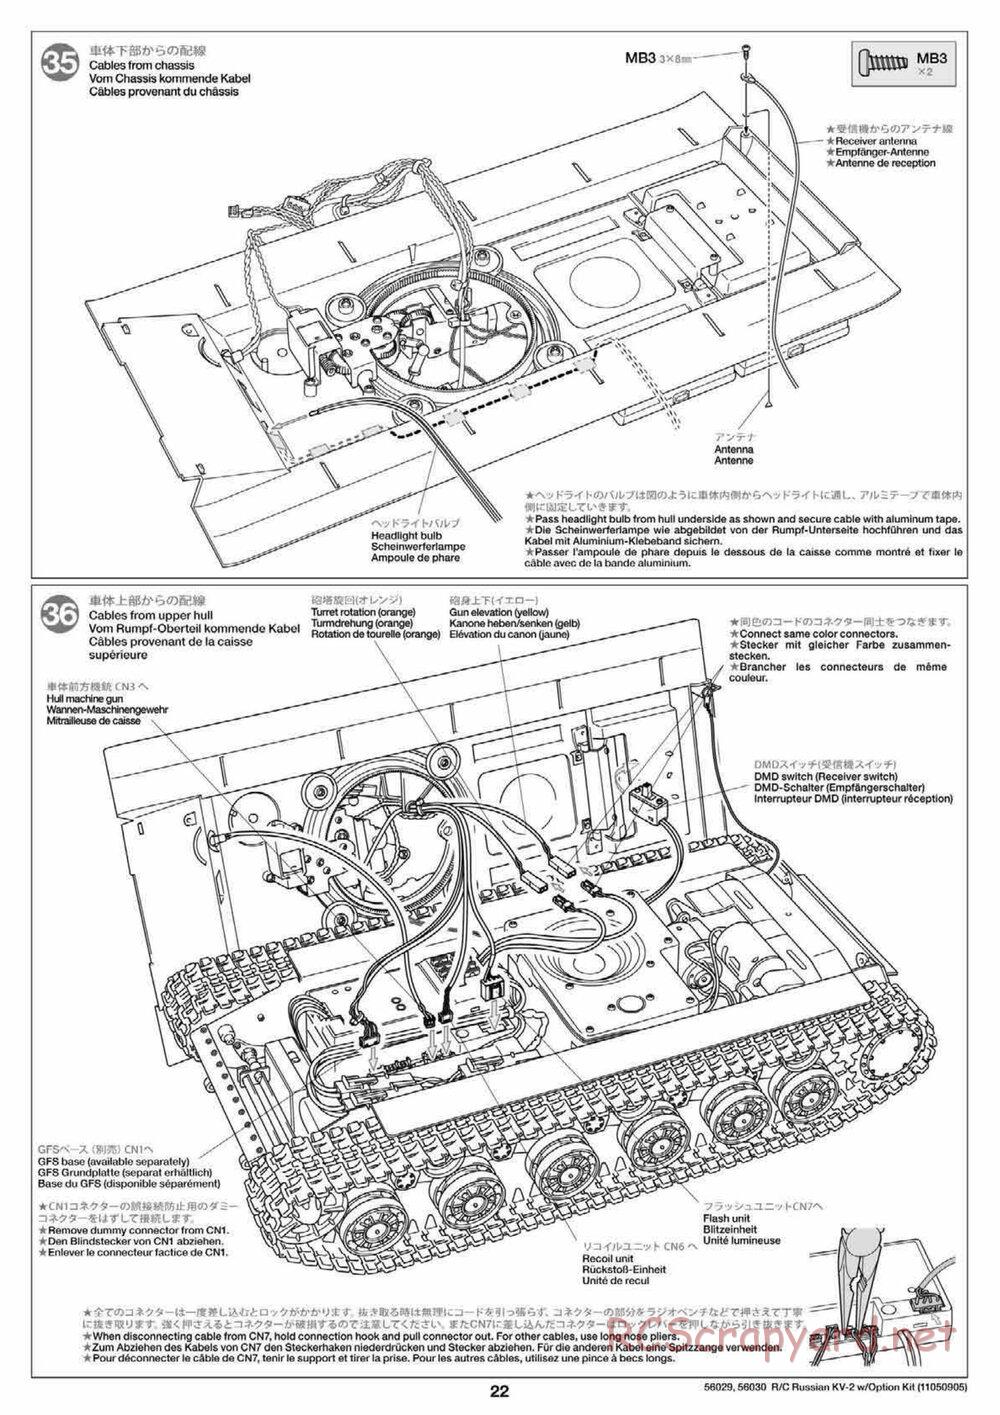 Tamiya - Russian Heavy Tank KV-2 Gigant - 1/16 Scale Chassis - Manual - Page 22